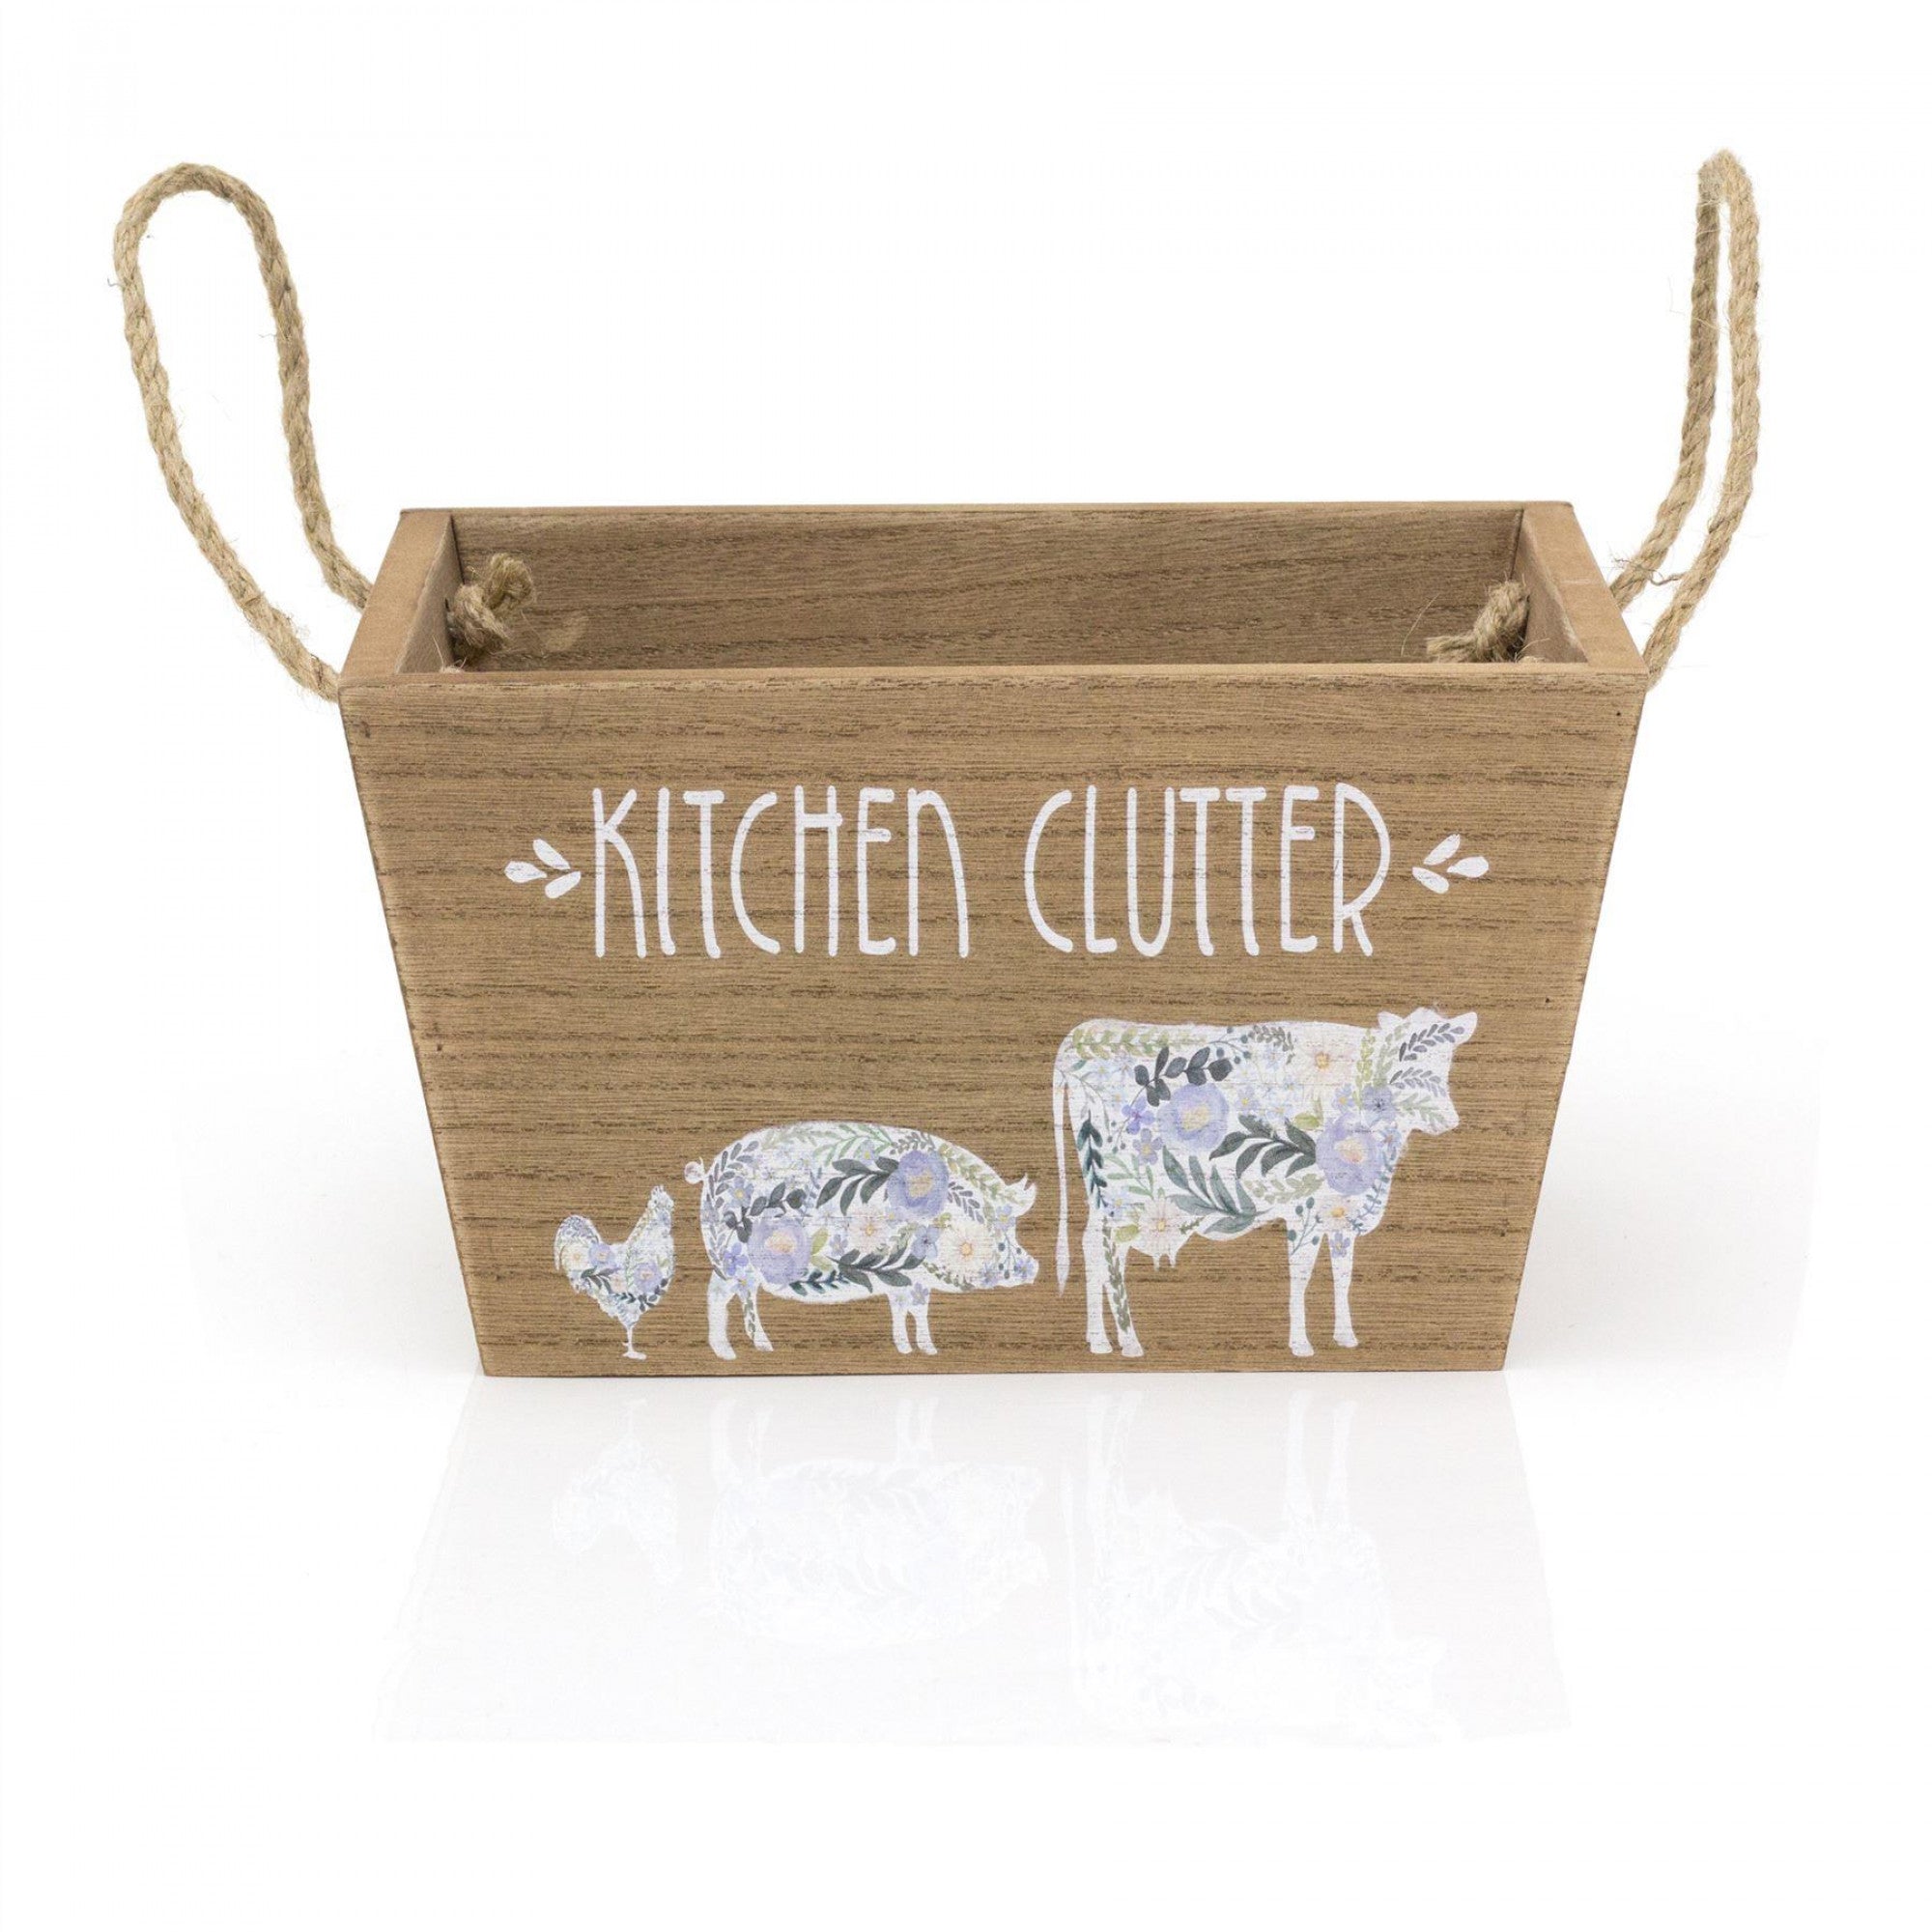 Kitchen Clutter Farm Theme Wooden Storage Crate - Kate's Cupboard